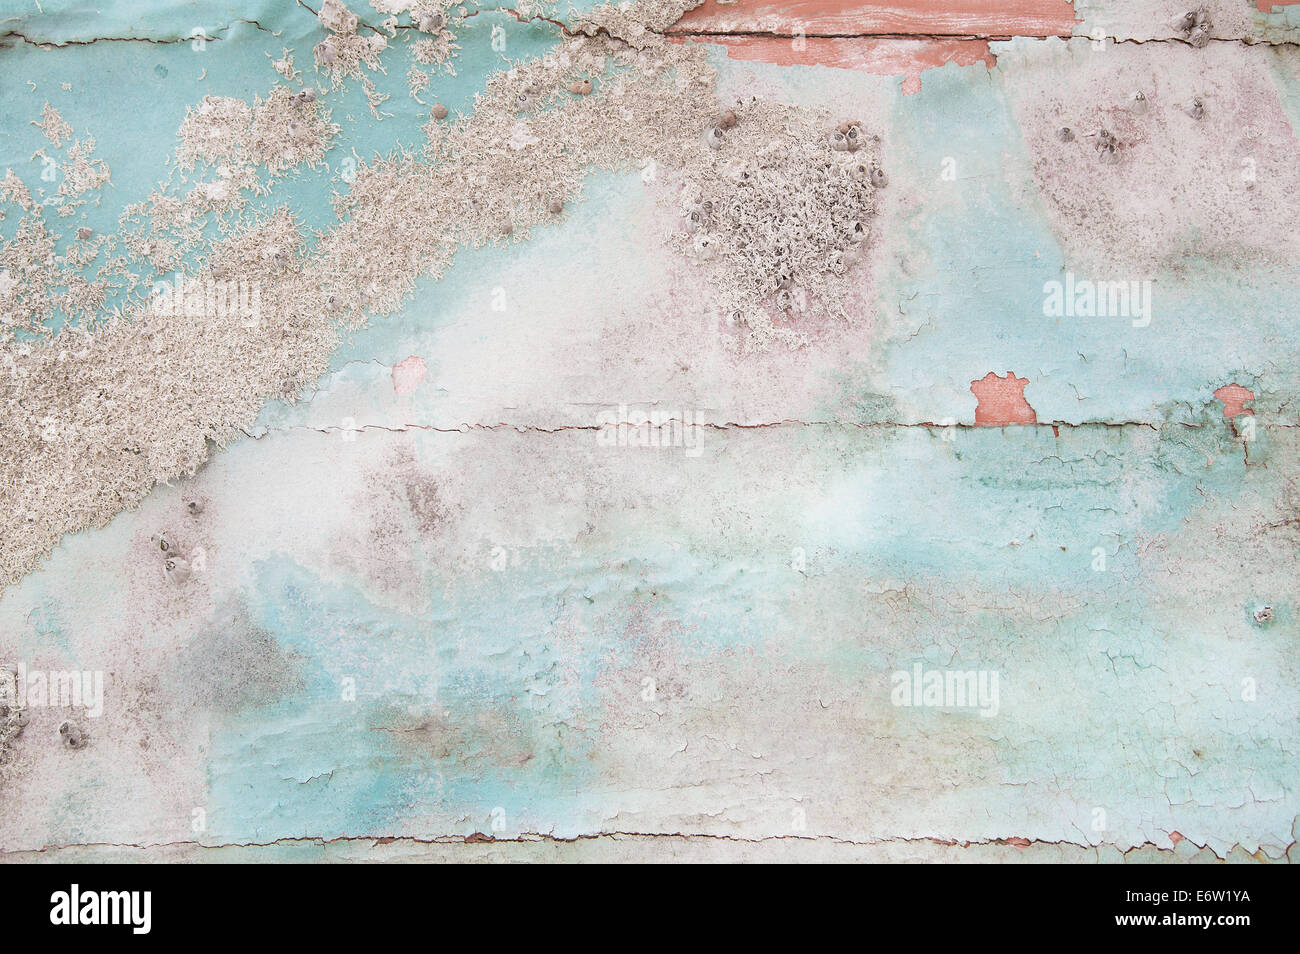 Old wooden shabby chic background with aged calcification of mussels and fossils in turquoise pastel colors. Stock Photo